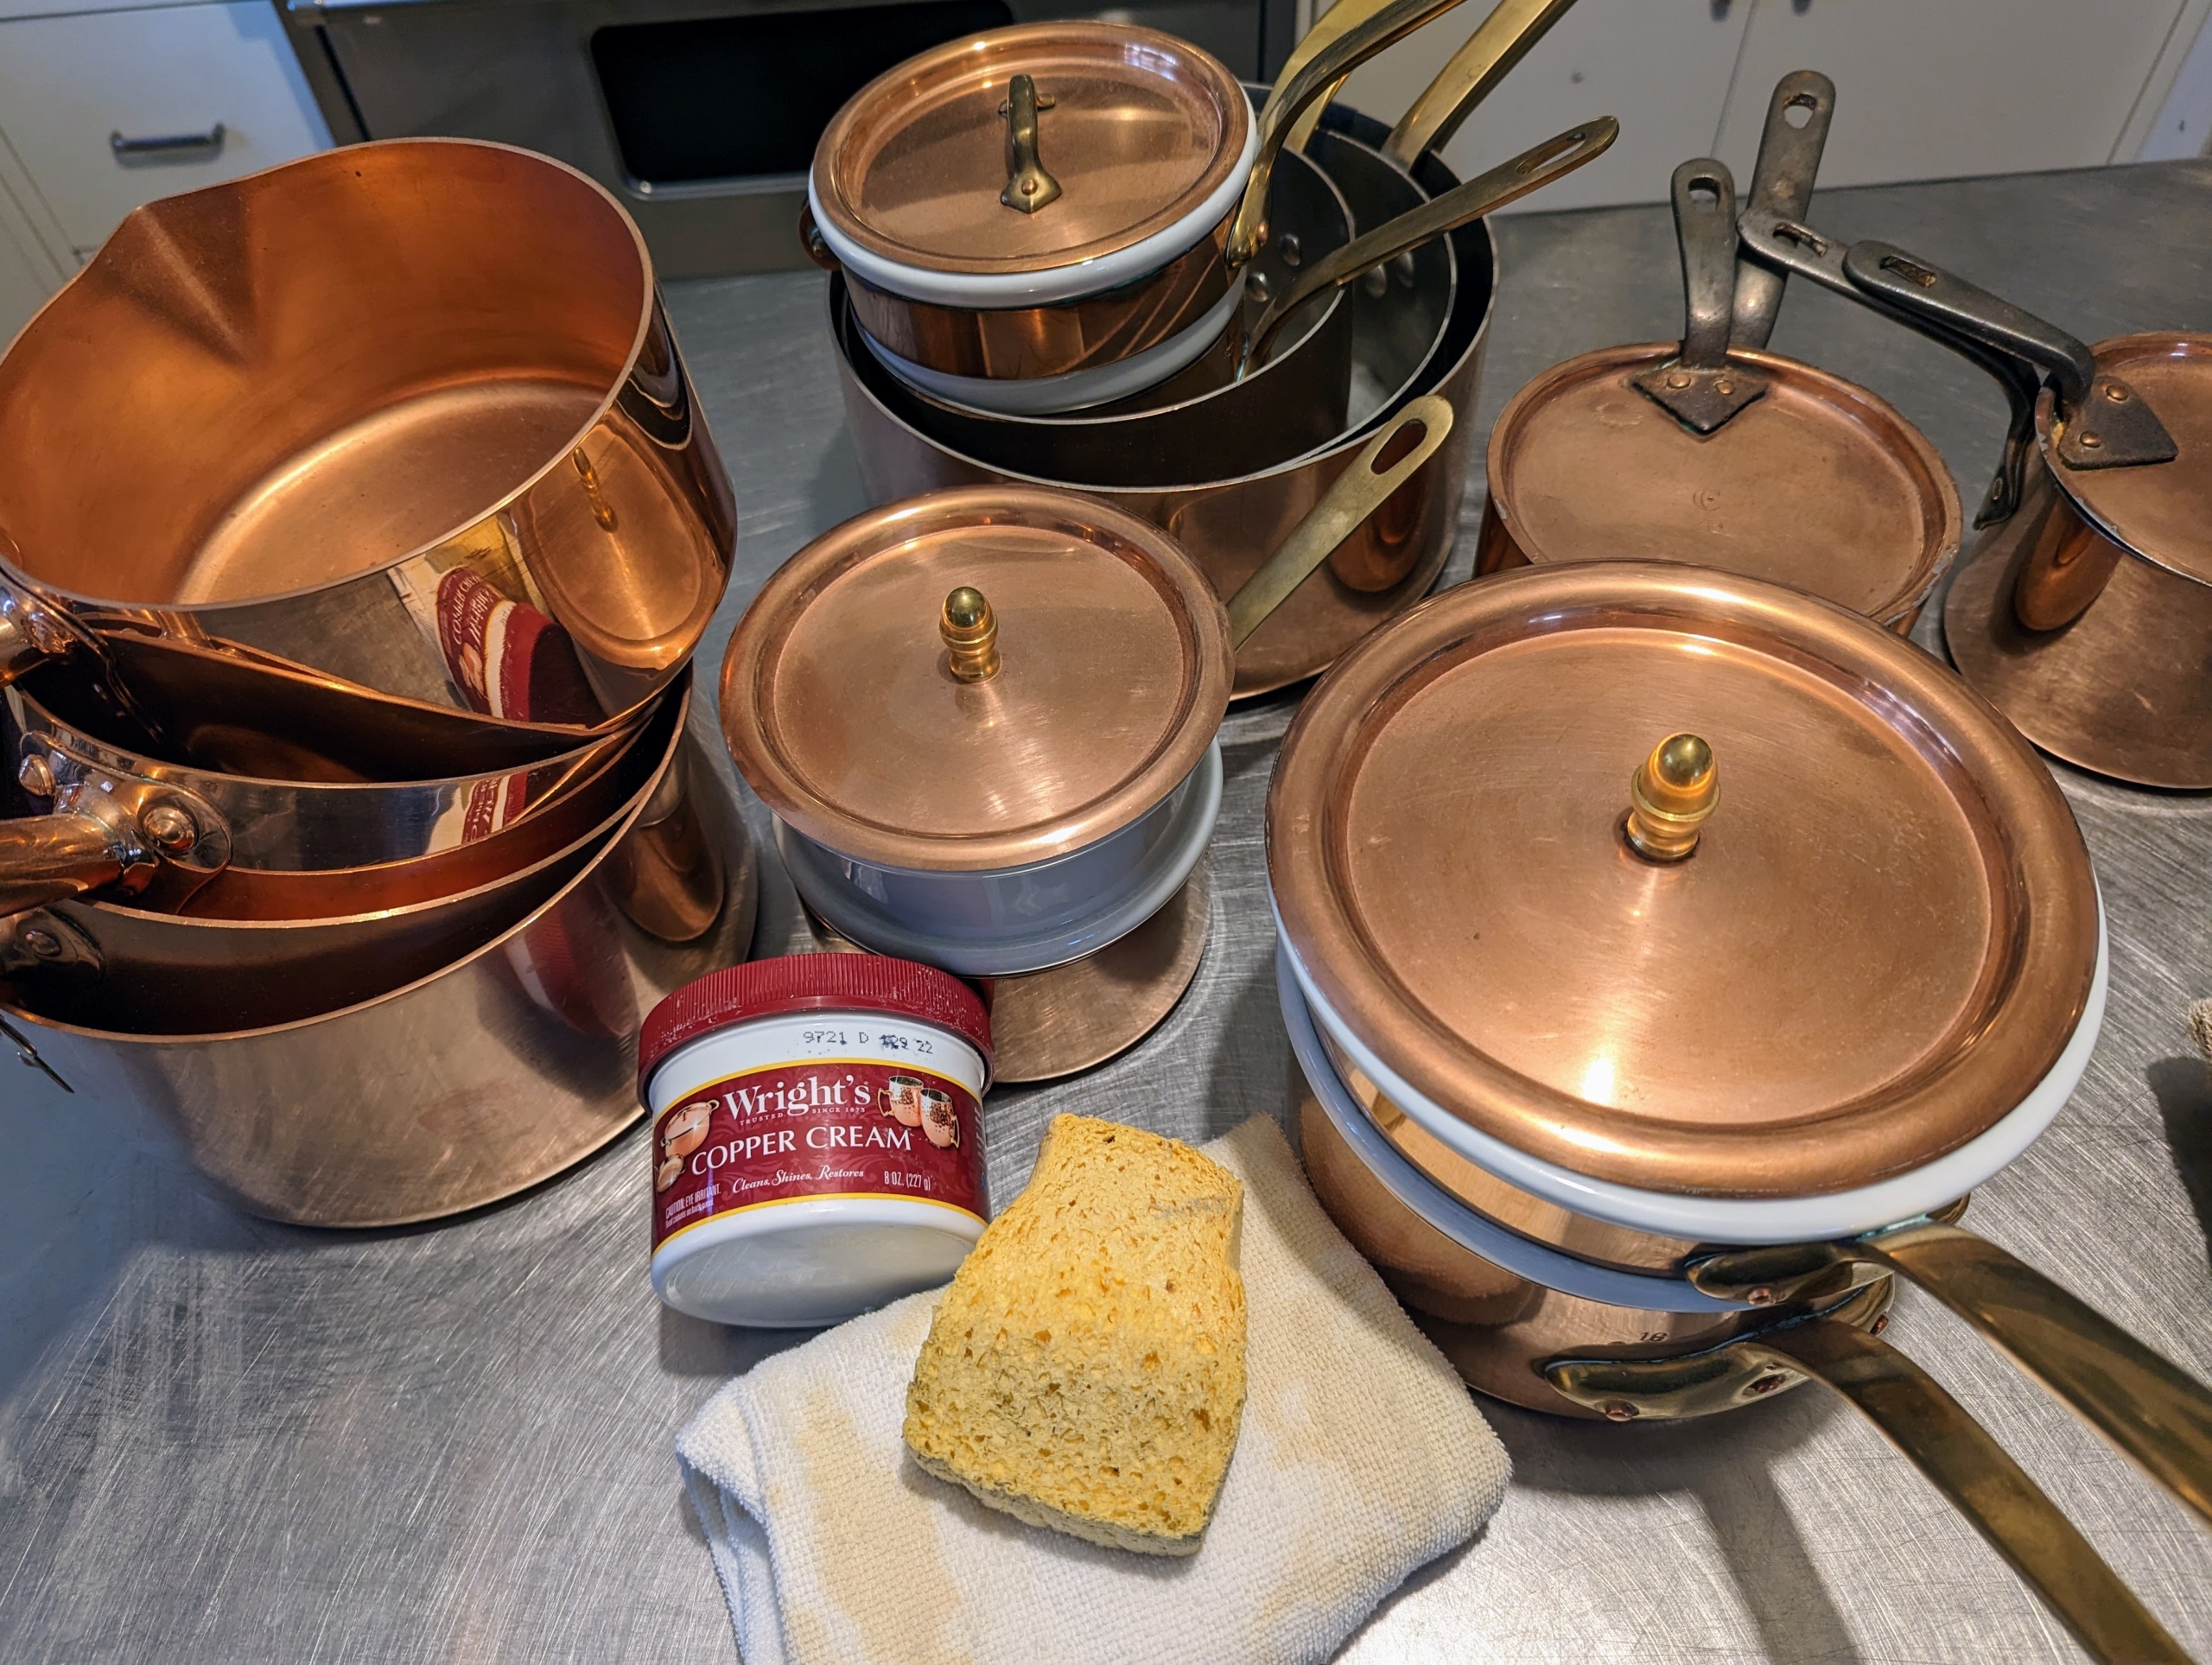 Our Hopeful Home: How to Polish Copper Cookware